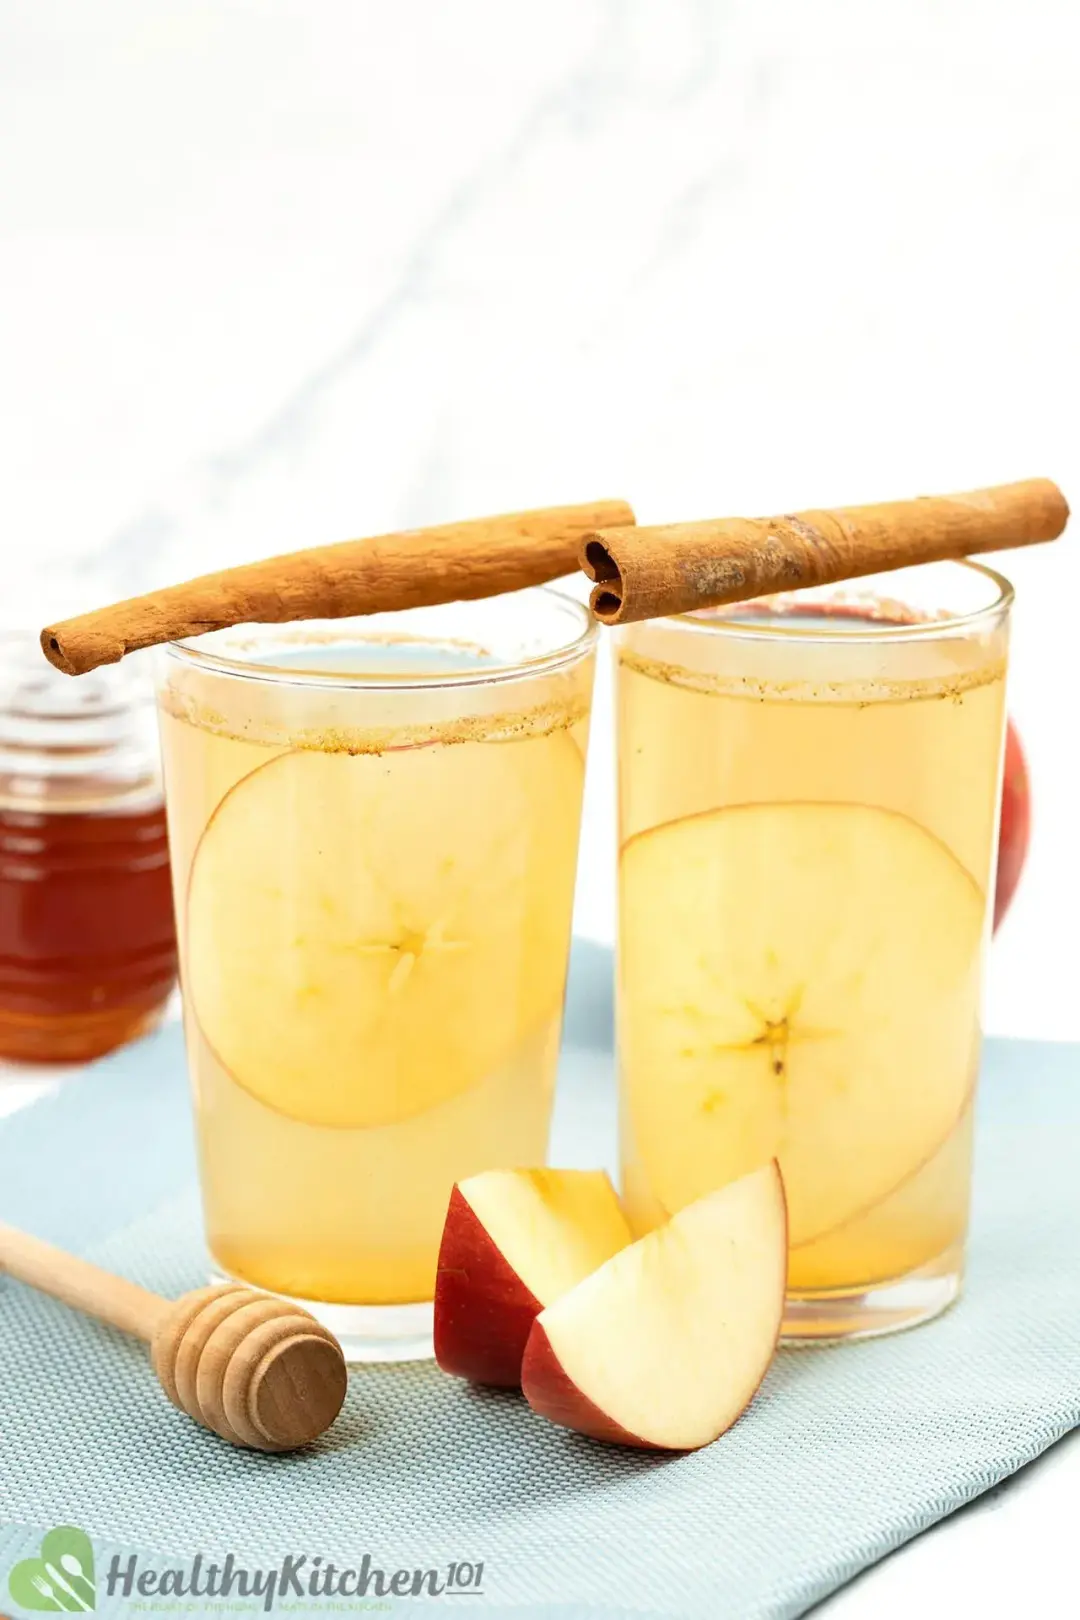 Two shot glasses of apple vinegar honey garnished with cinnamon sticks and apple wedges